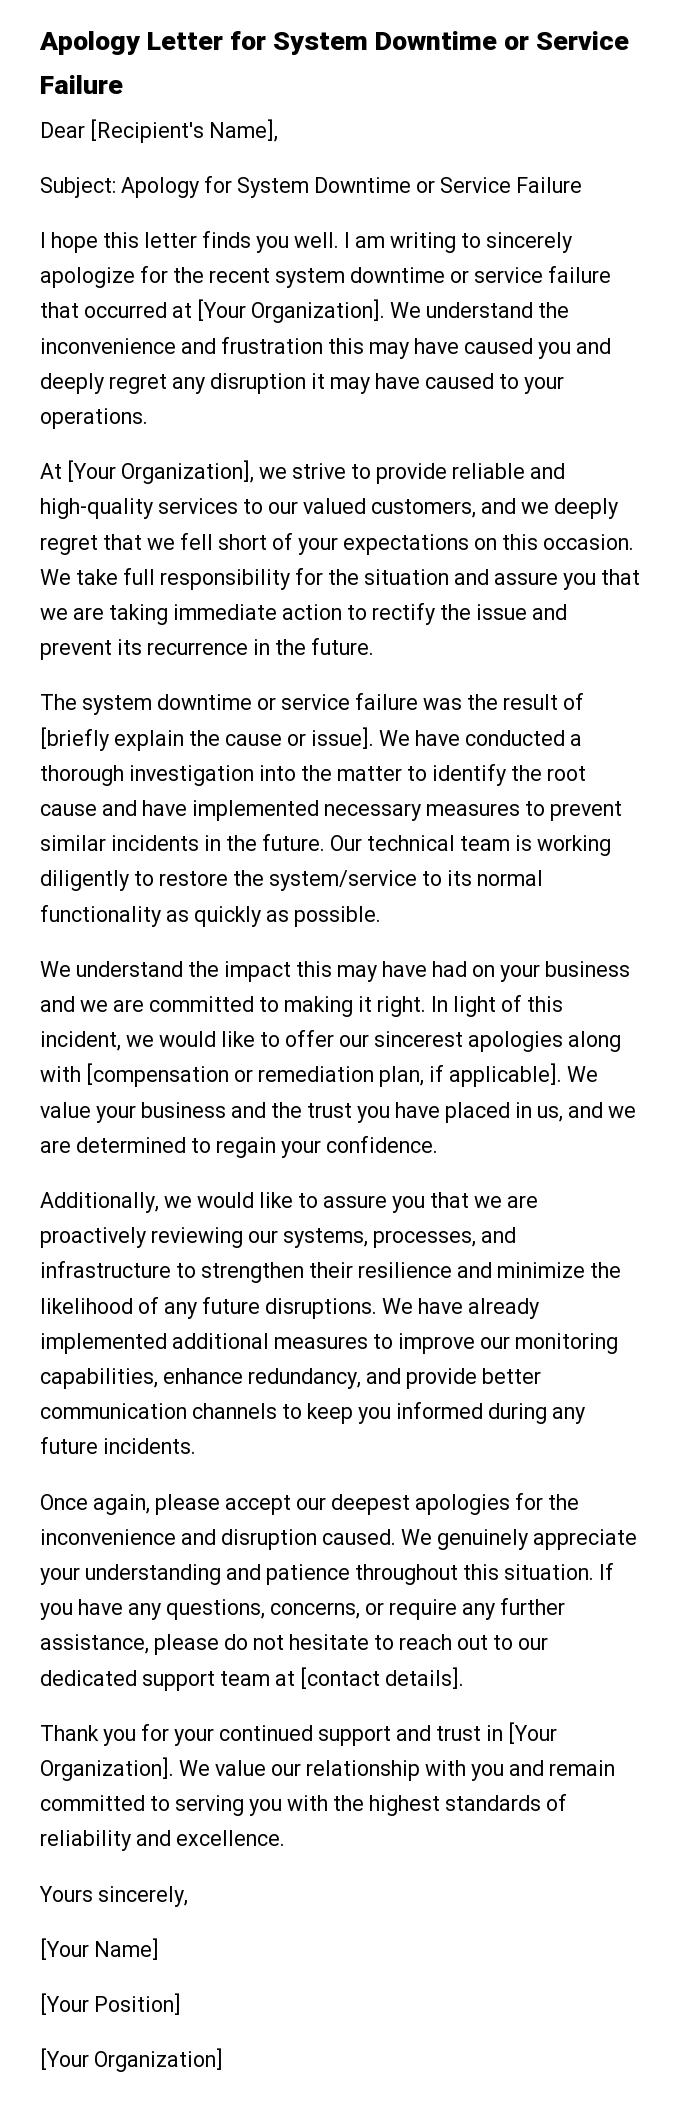 Apology Letter for System Downtime or Service Failure